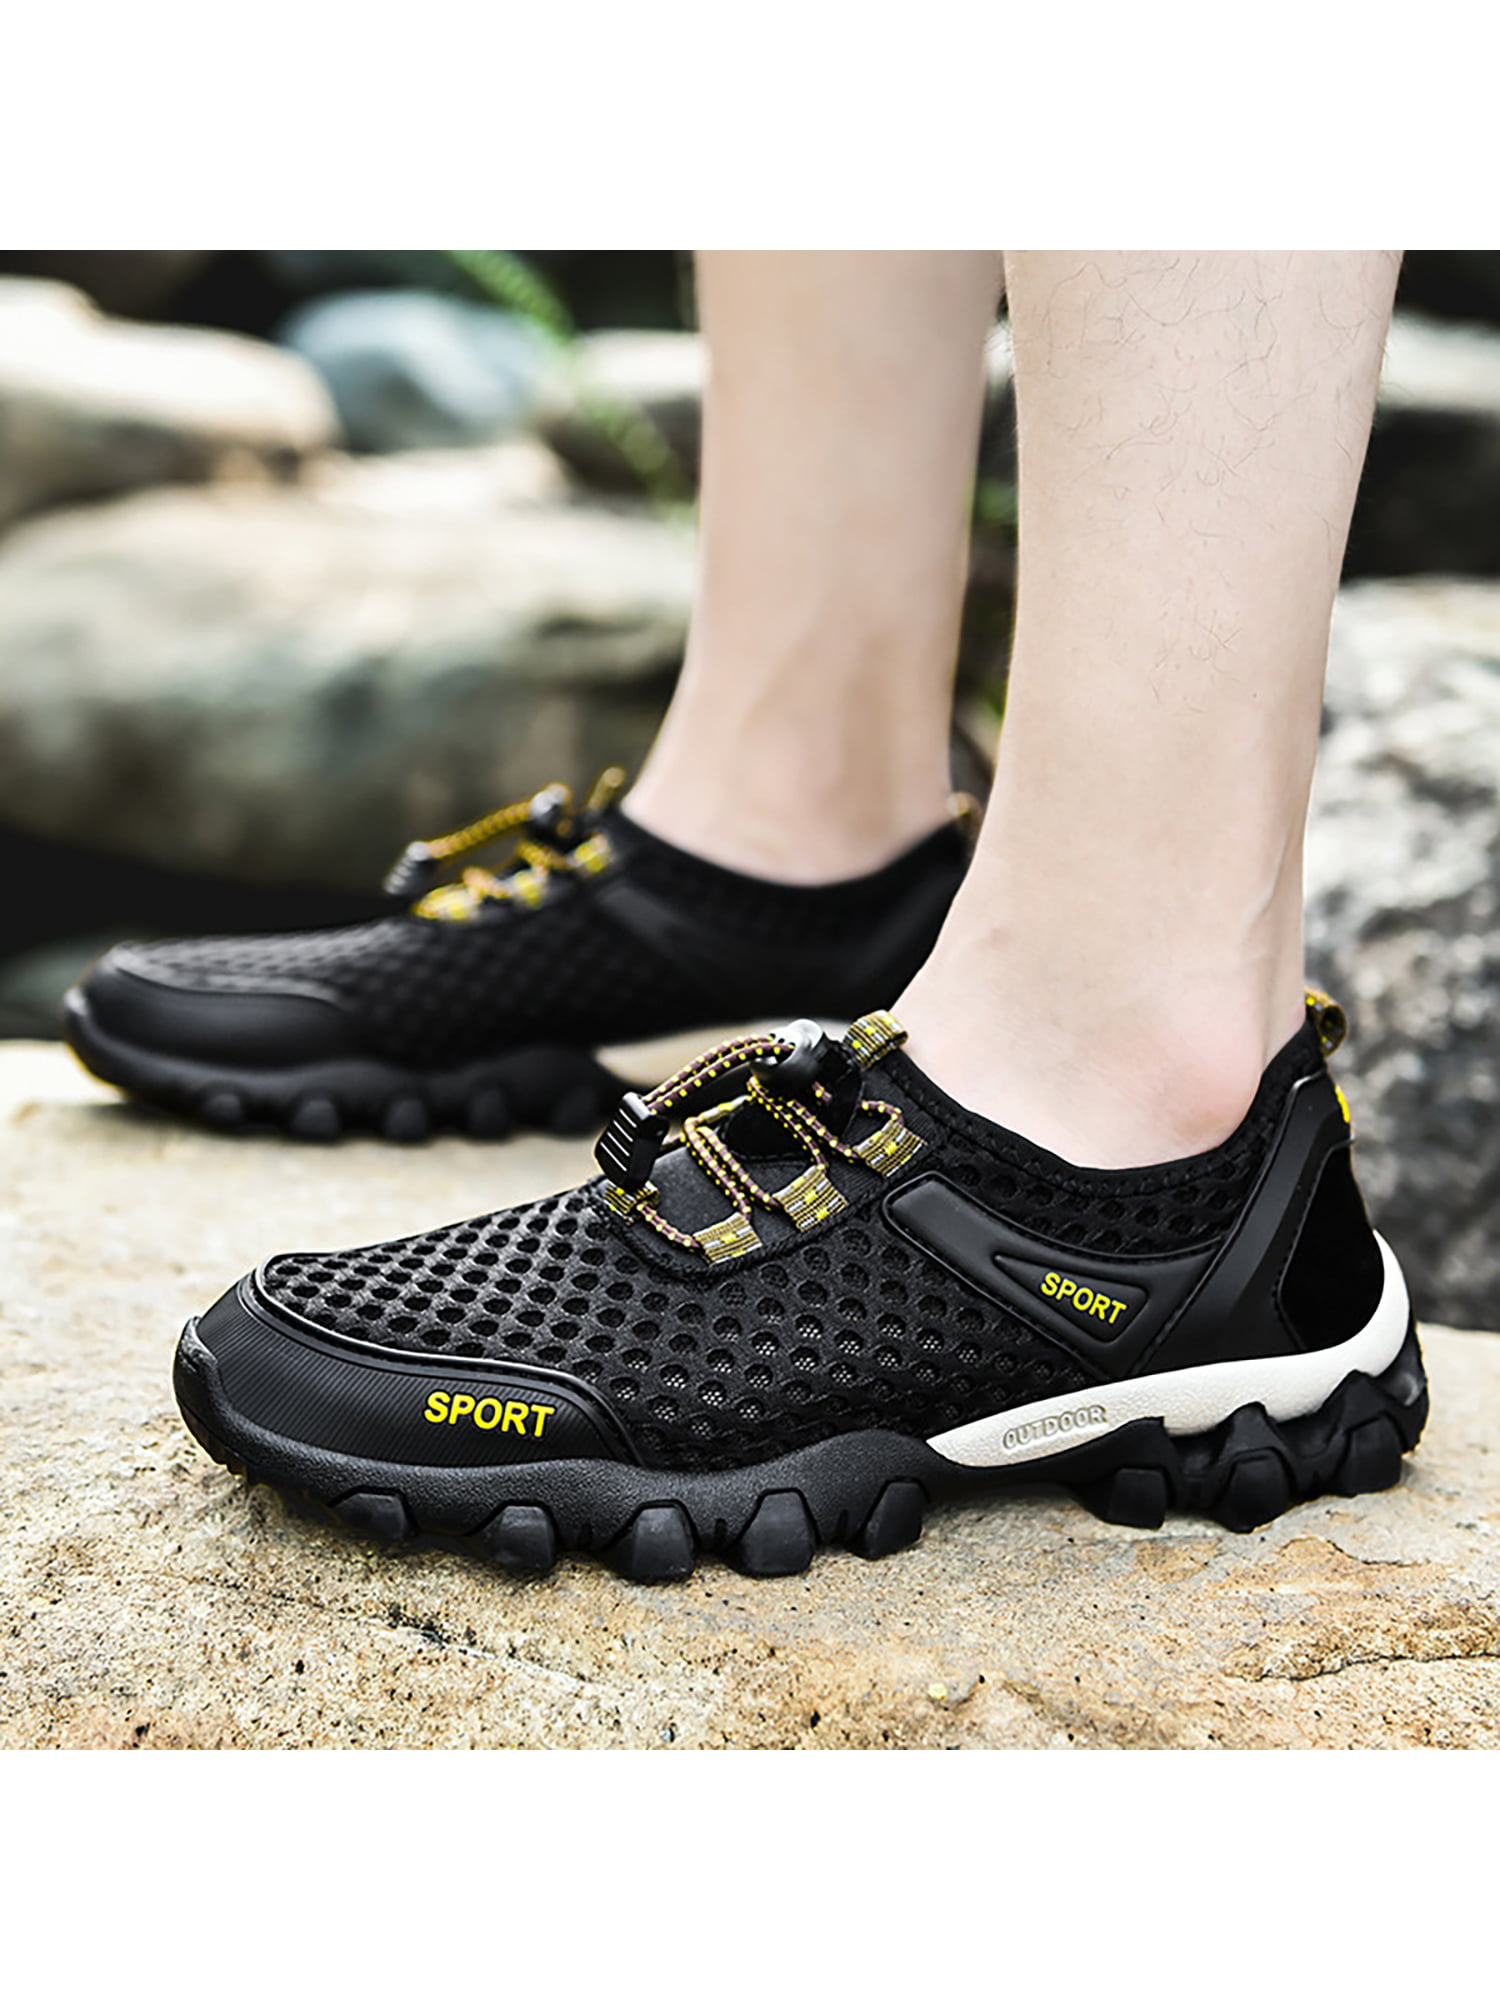 New Style Men‘s Sports Shoes Athletic Running Hiking Sneakers Climbing Gym Shoes 